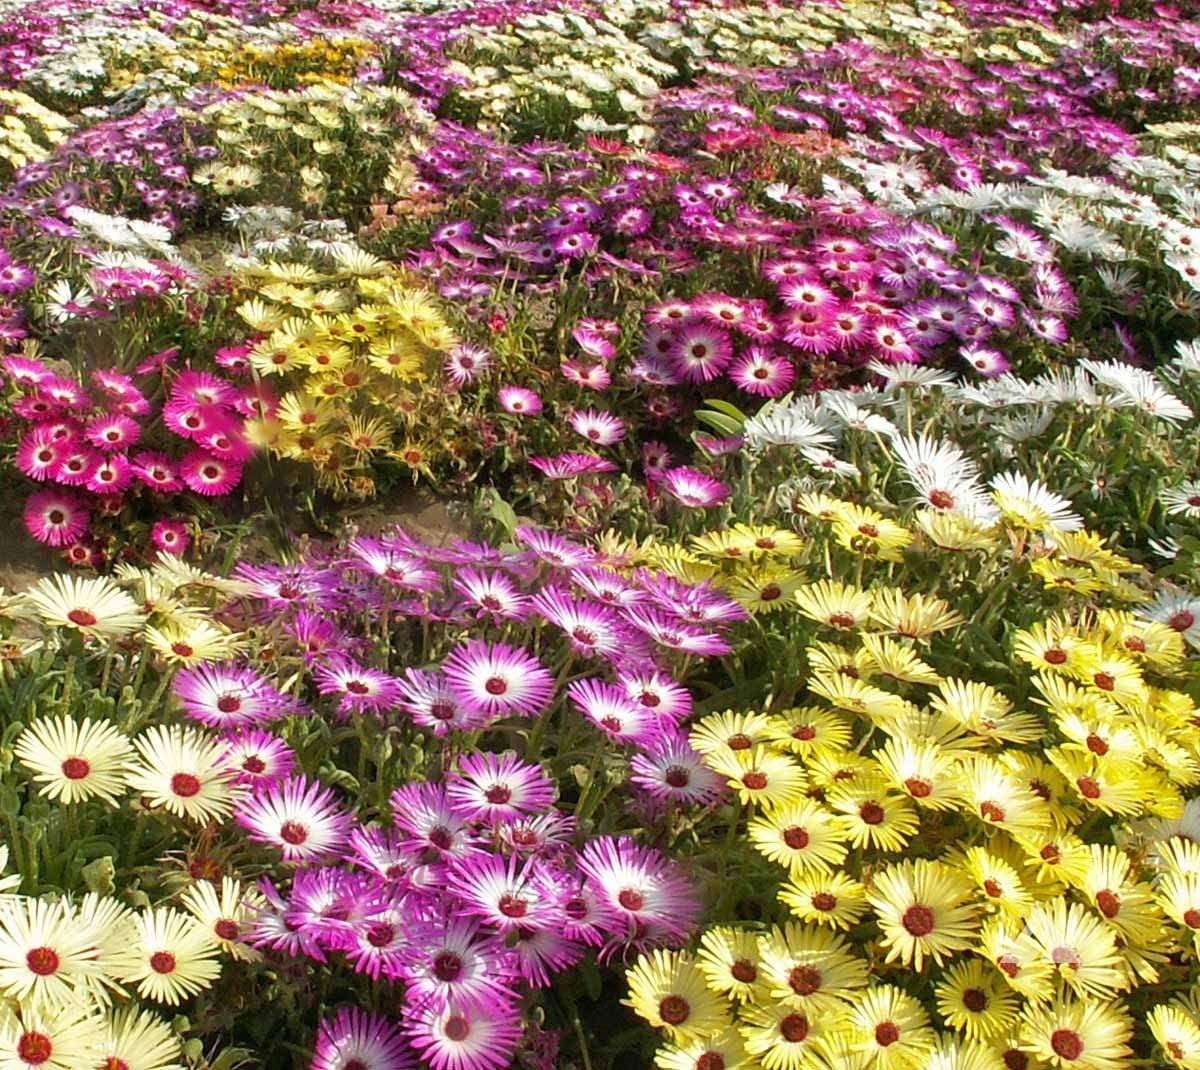 Mixed Annual Iceplant